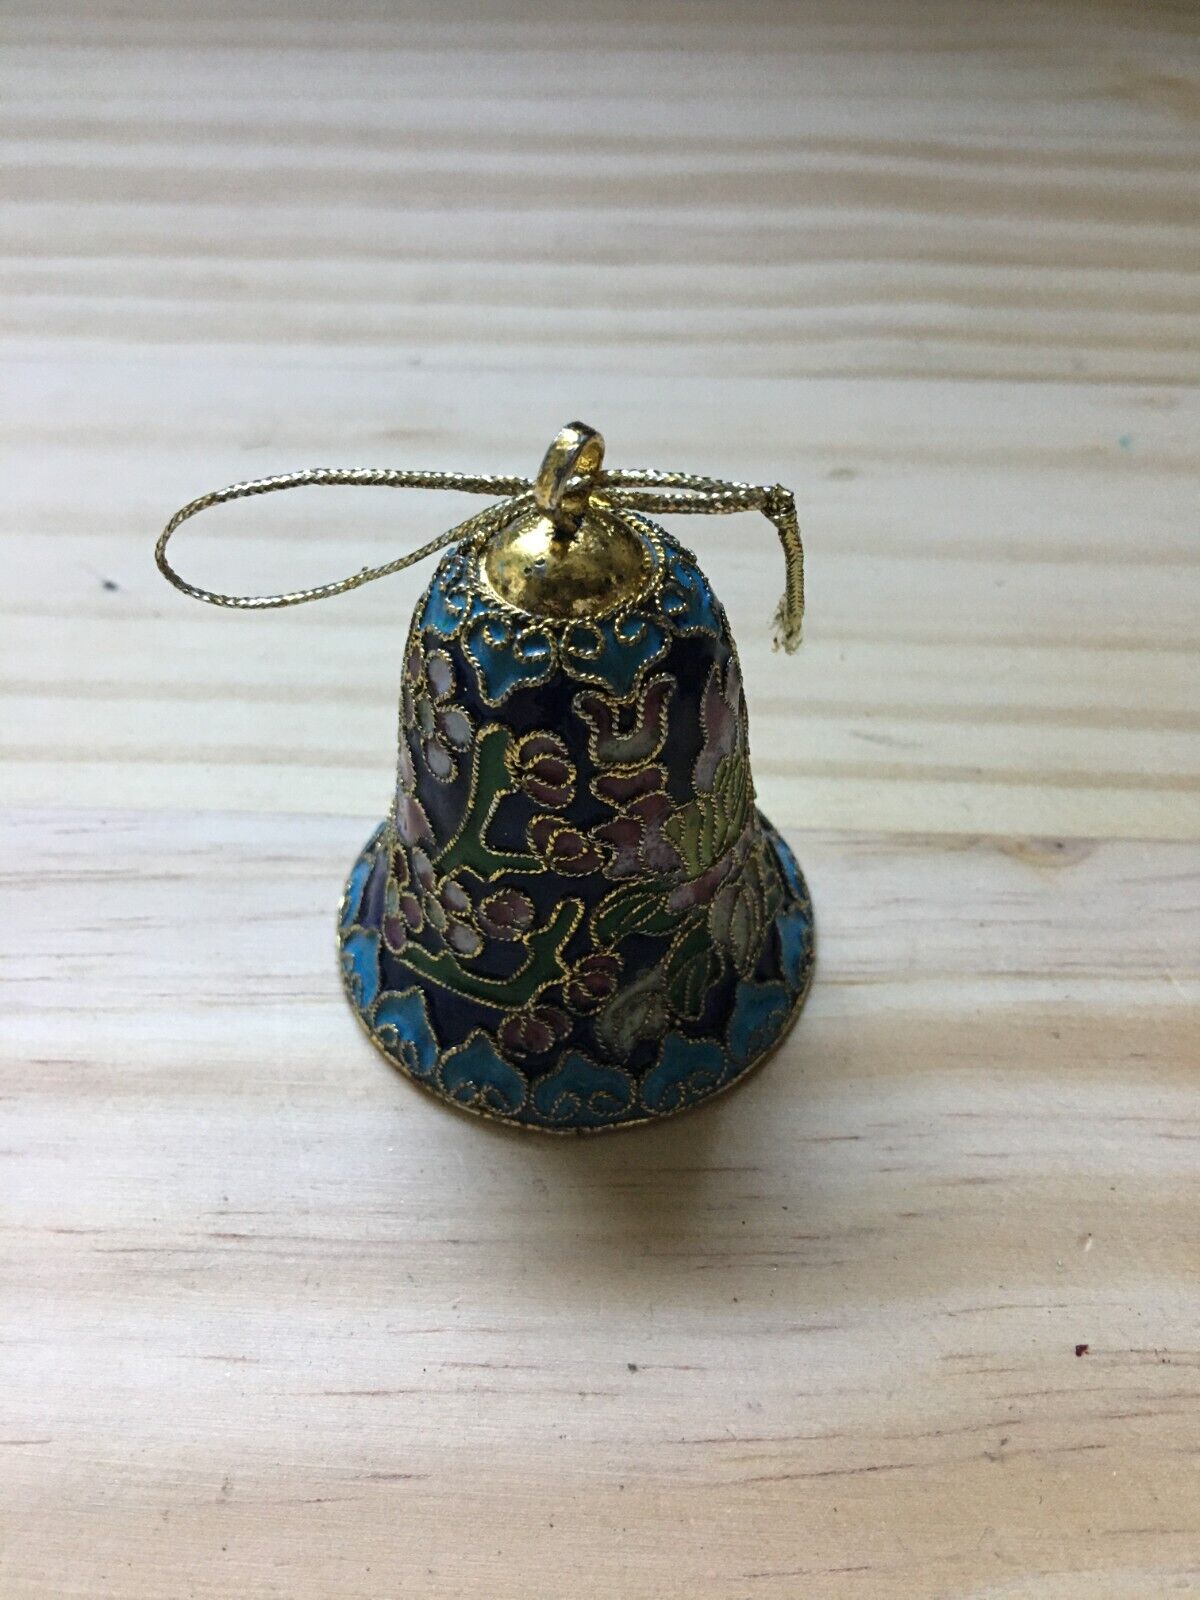 Vintage 1990s Chinese Cloisonne Enamel Ornament Bell w/ an Amber Clapper 2.25”H